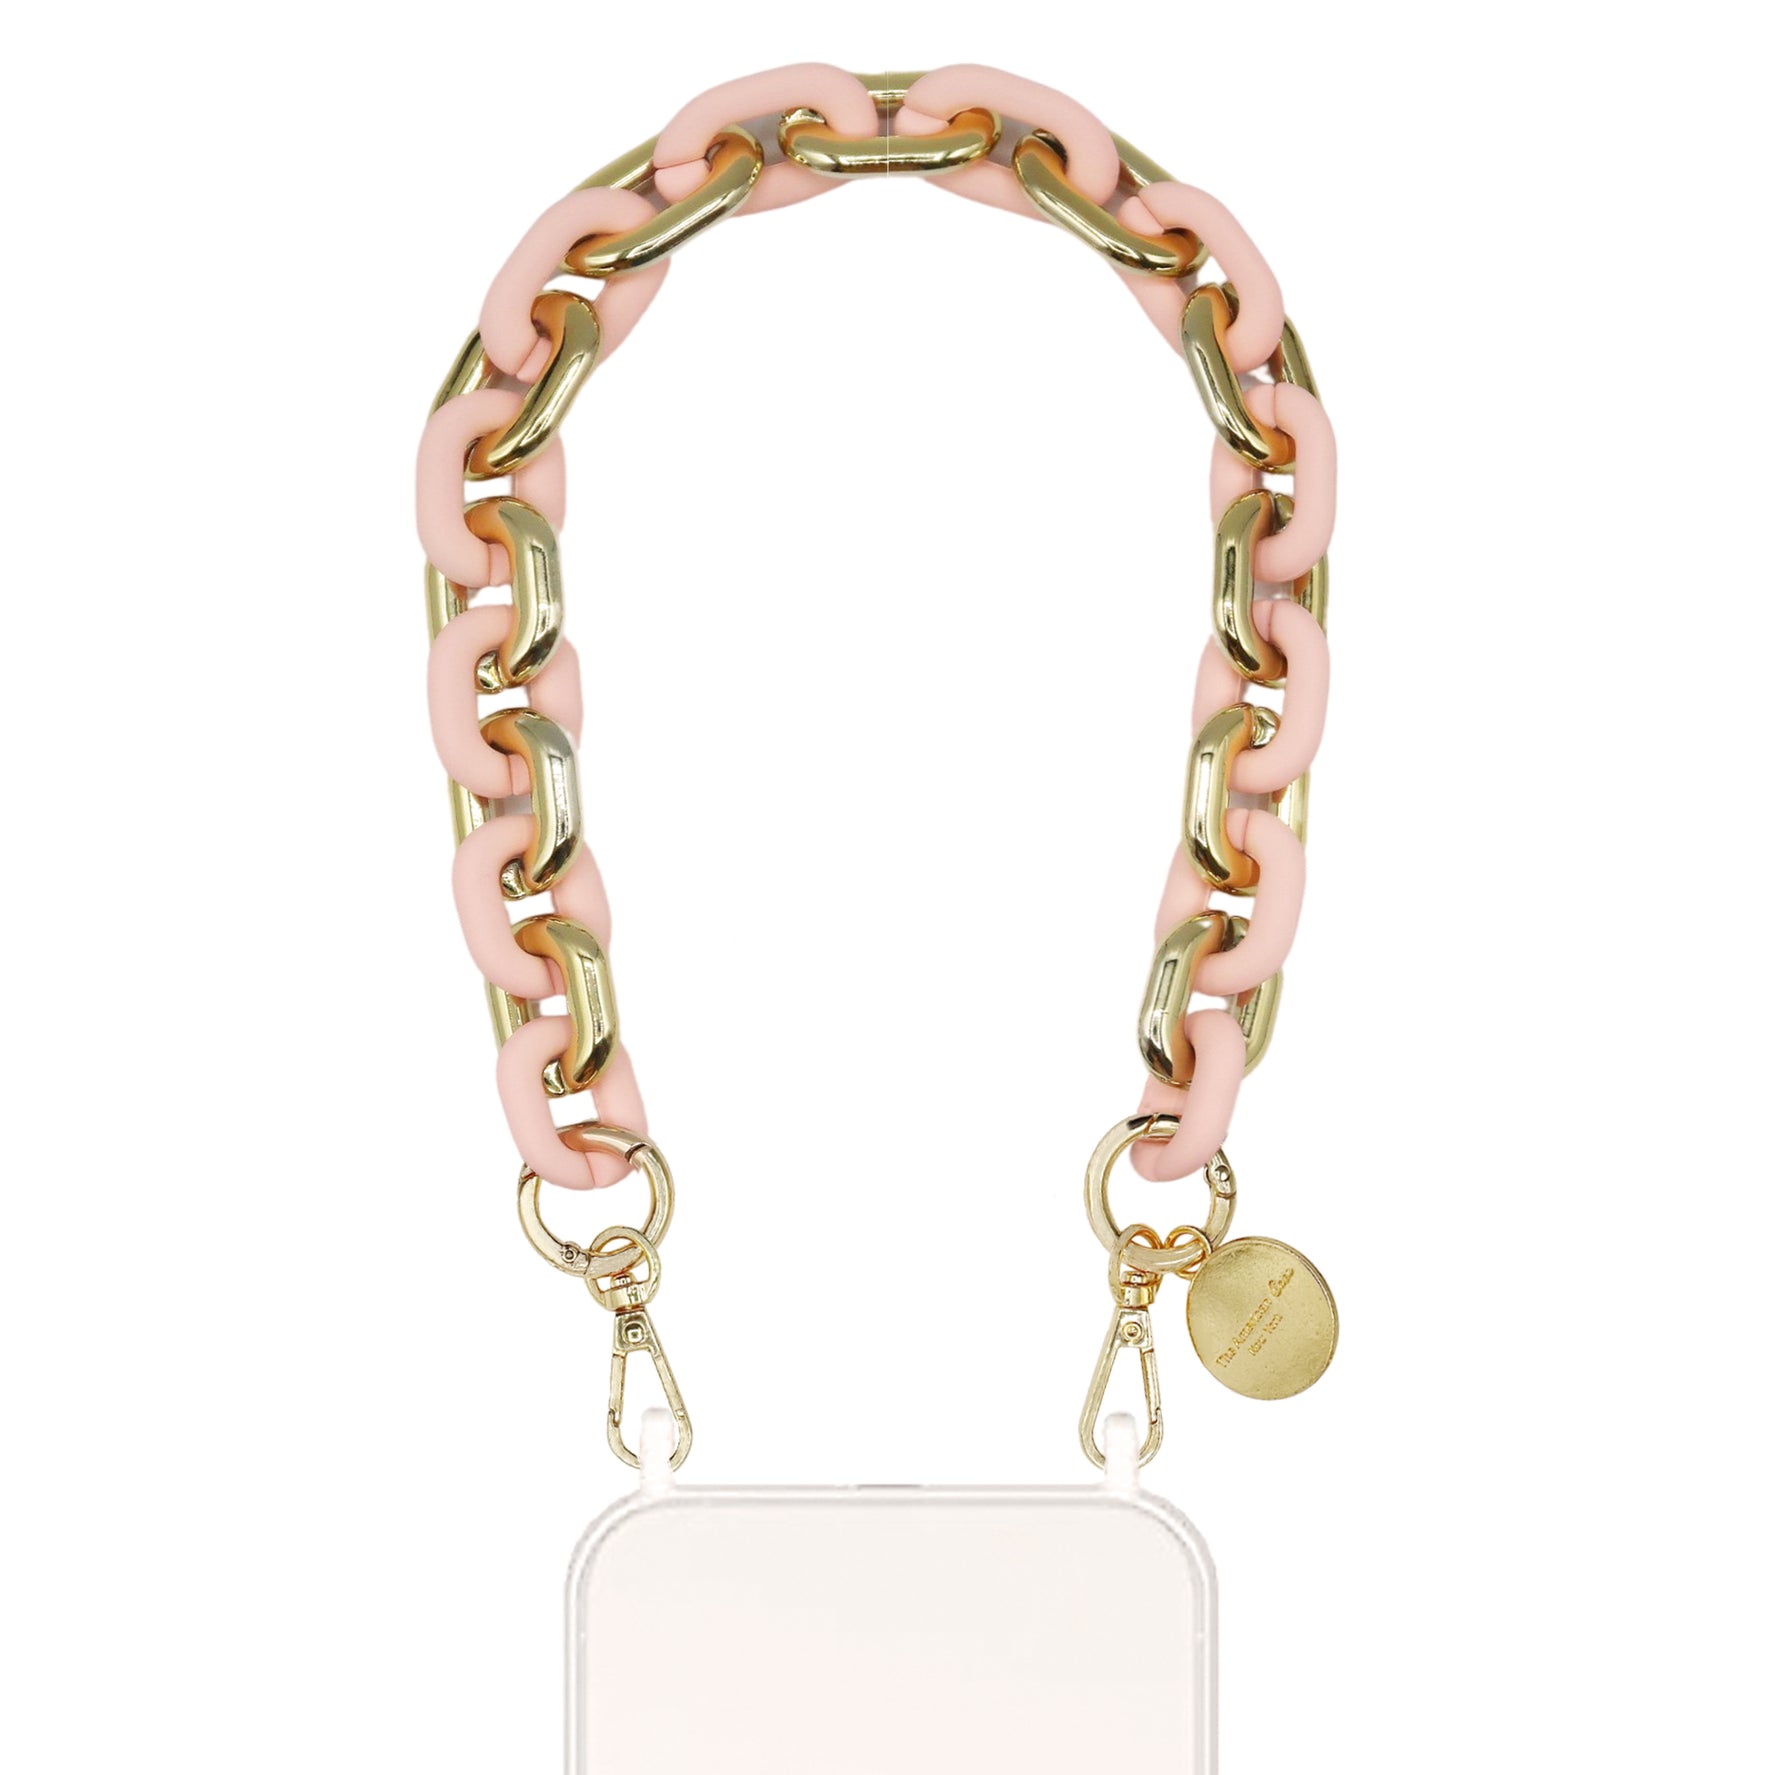 Harley - Gold and Pink Resin Link Bracelet Phone Chain With Golden Carabiners